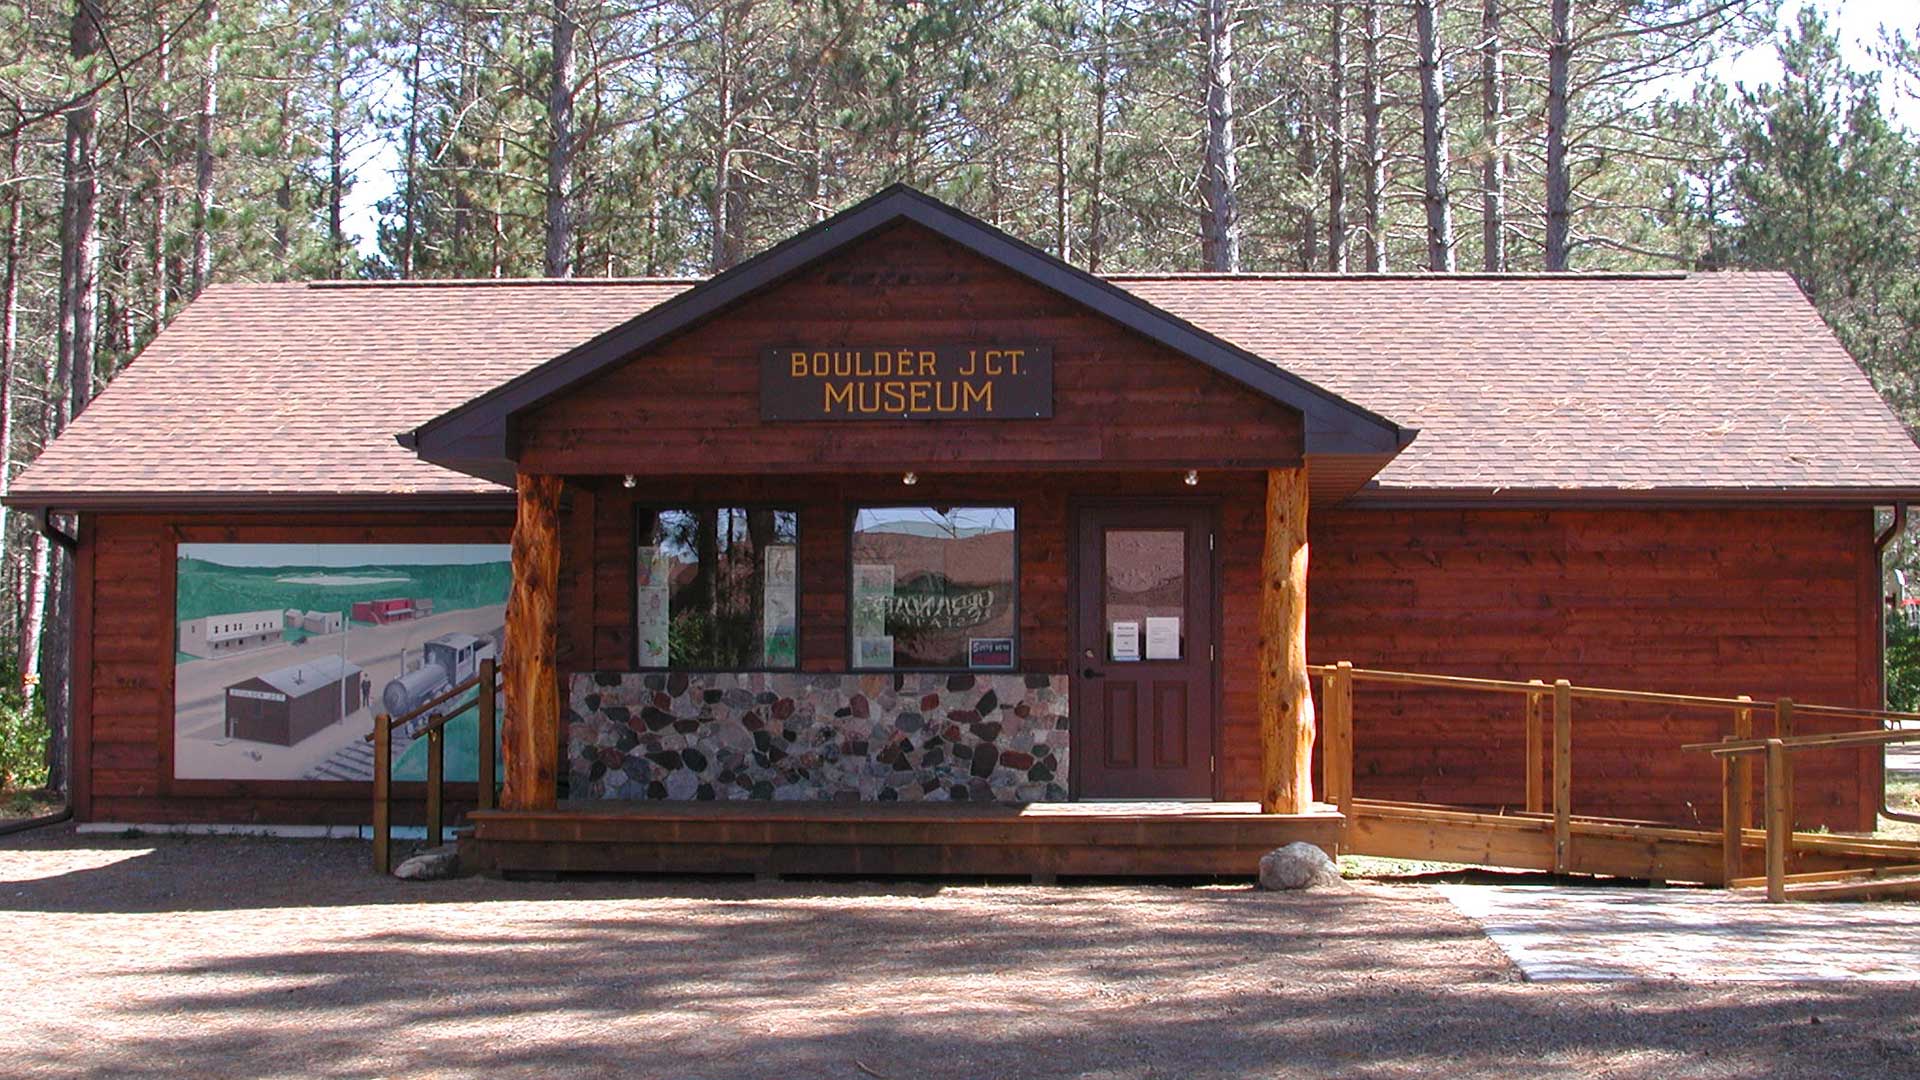 Entrance to the Boulder Junction Historical Museum